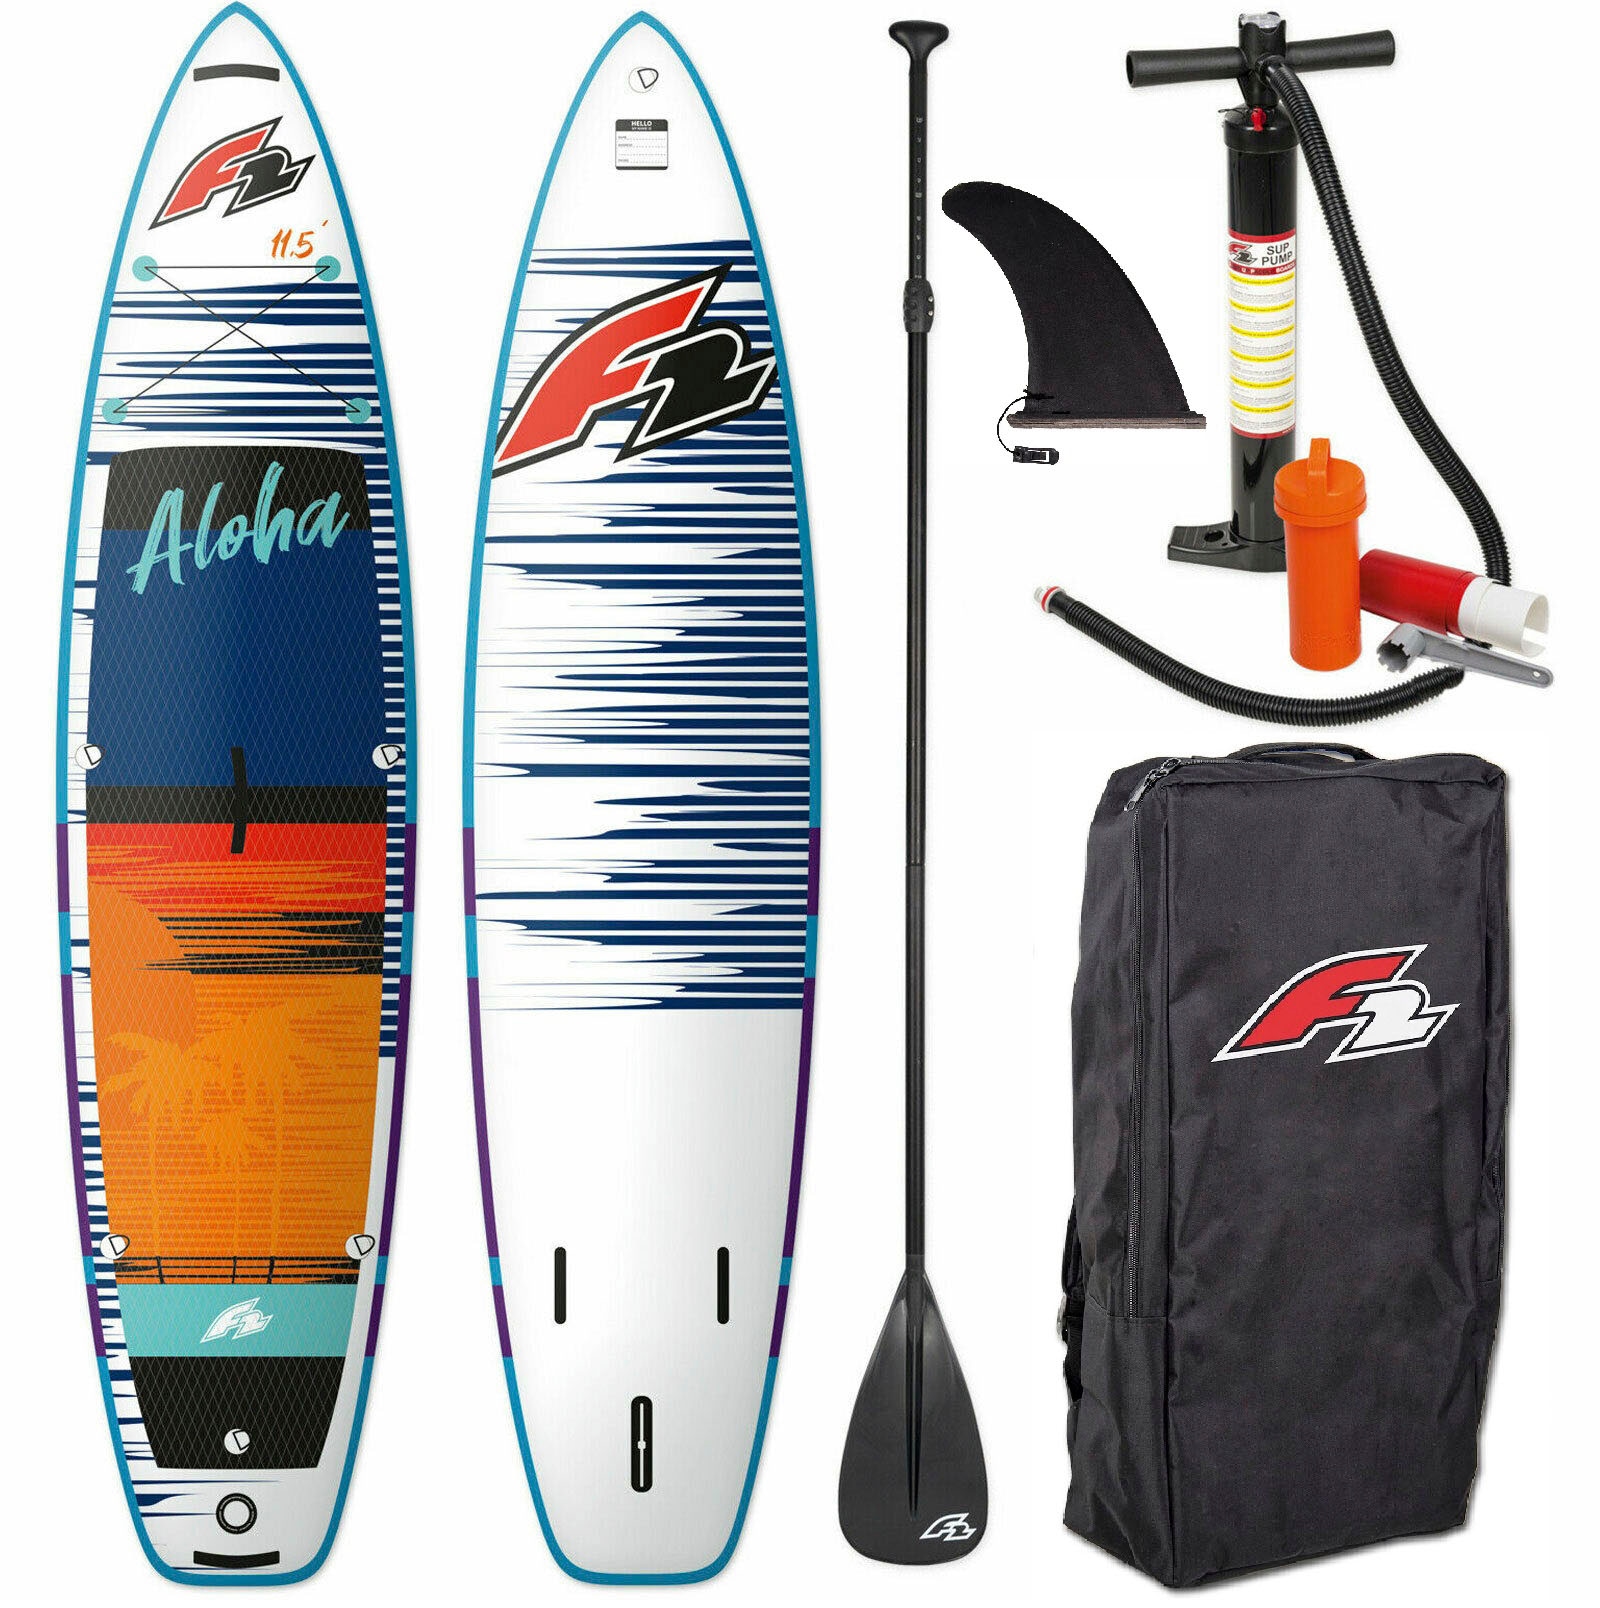 F2 Inflatable SUP-Board »Aloha 11,4 Shop im Online 5 red«, OTTO tlg.) kaufen (Packung